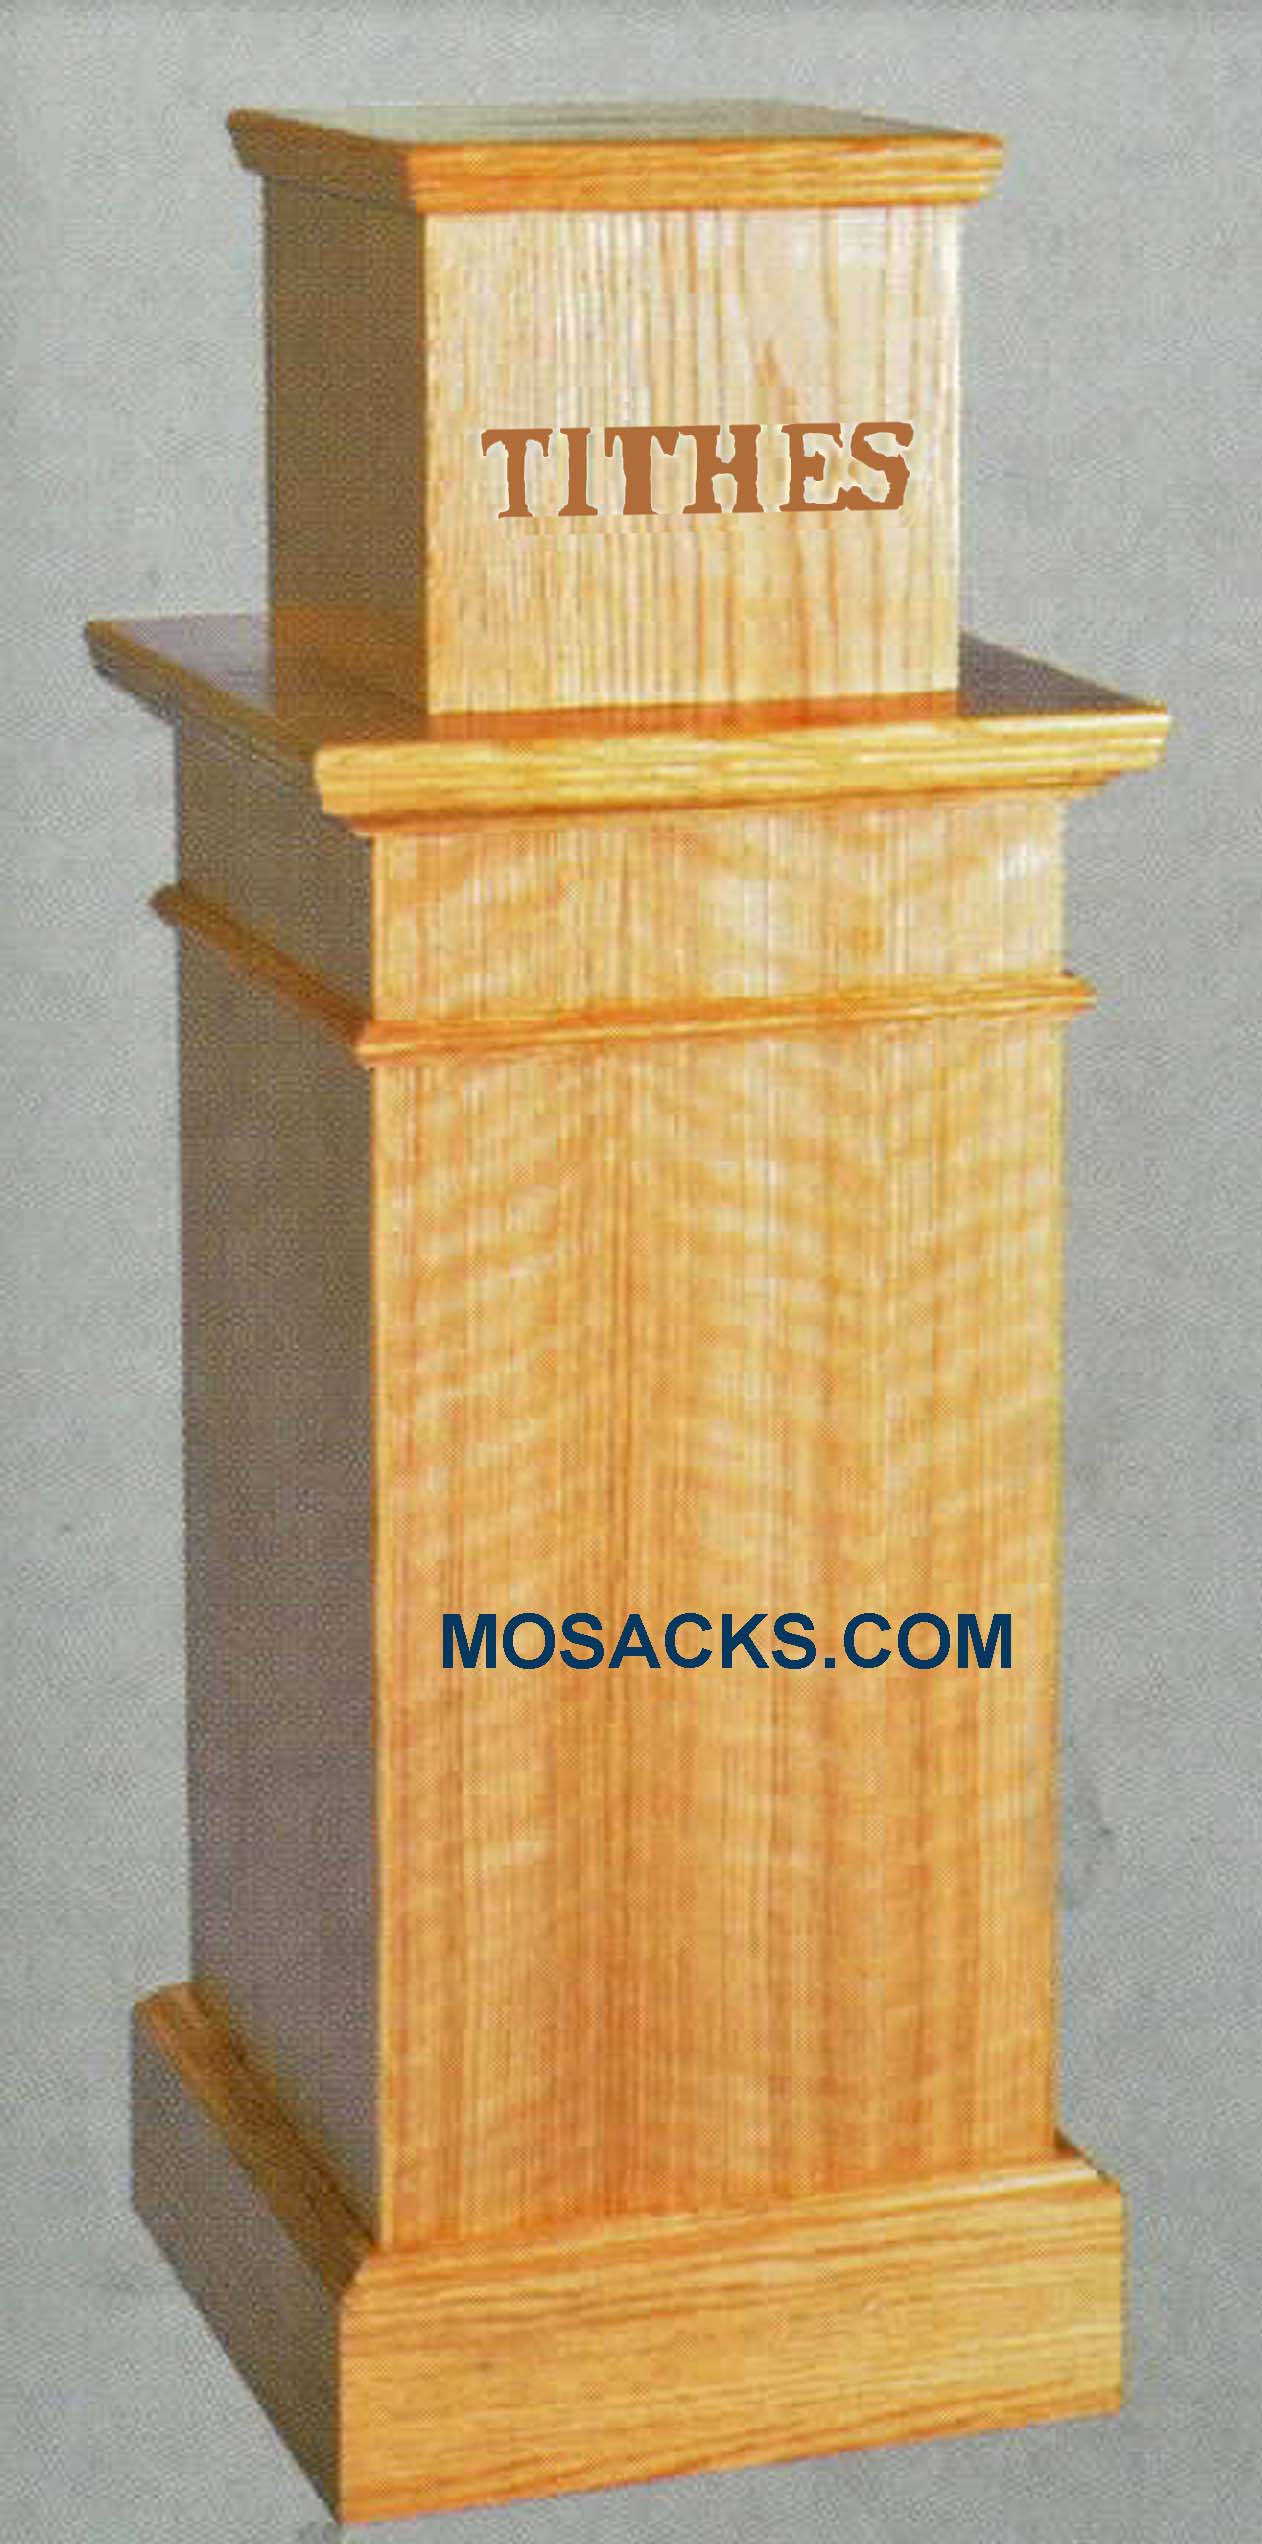 Wooden TITHES Box with Lettering without Light 16" w x 16" d x 42" h 40-1161